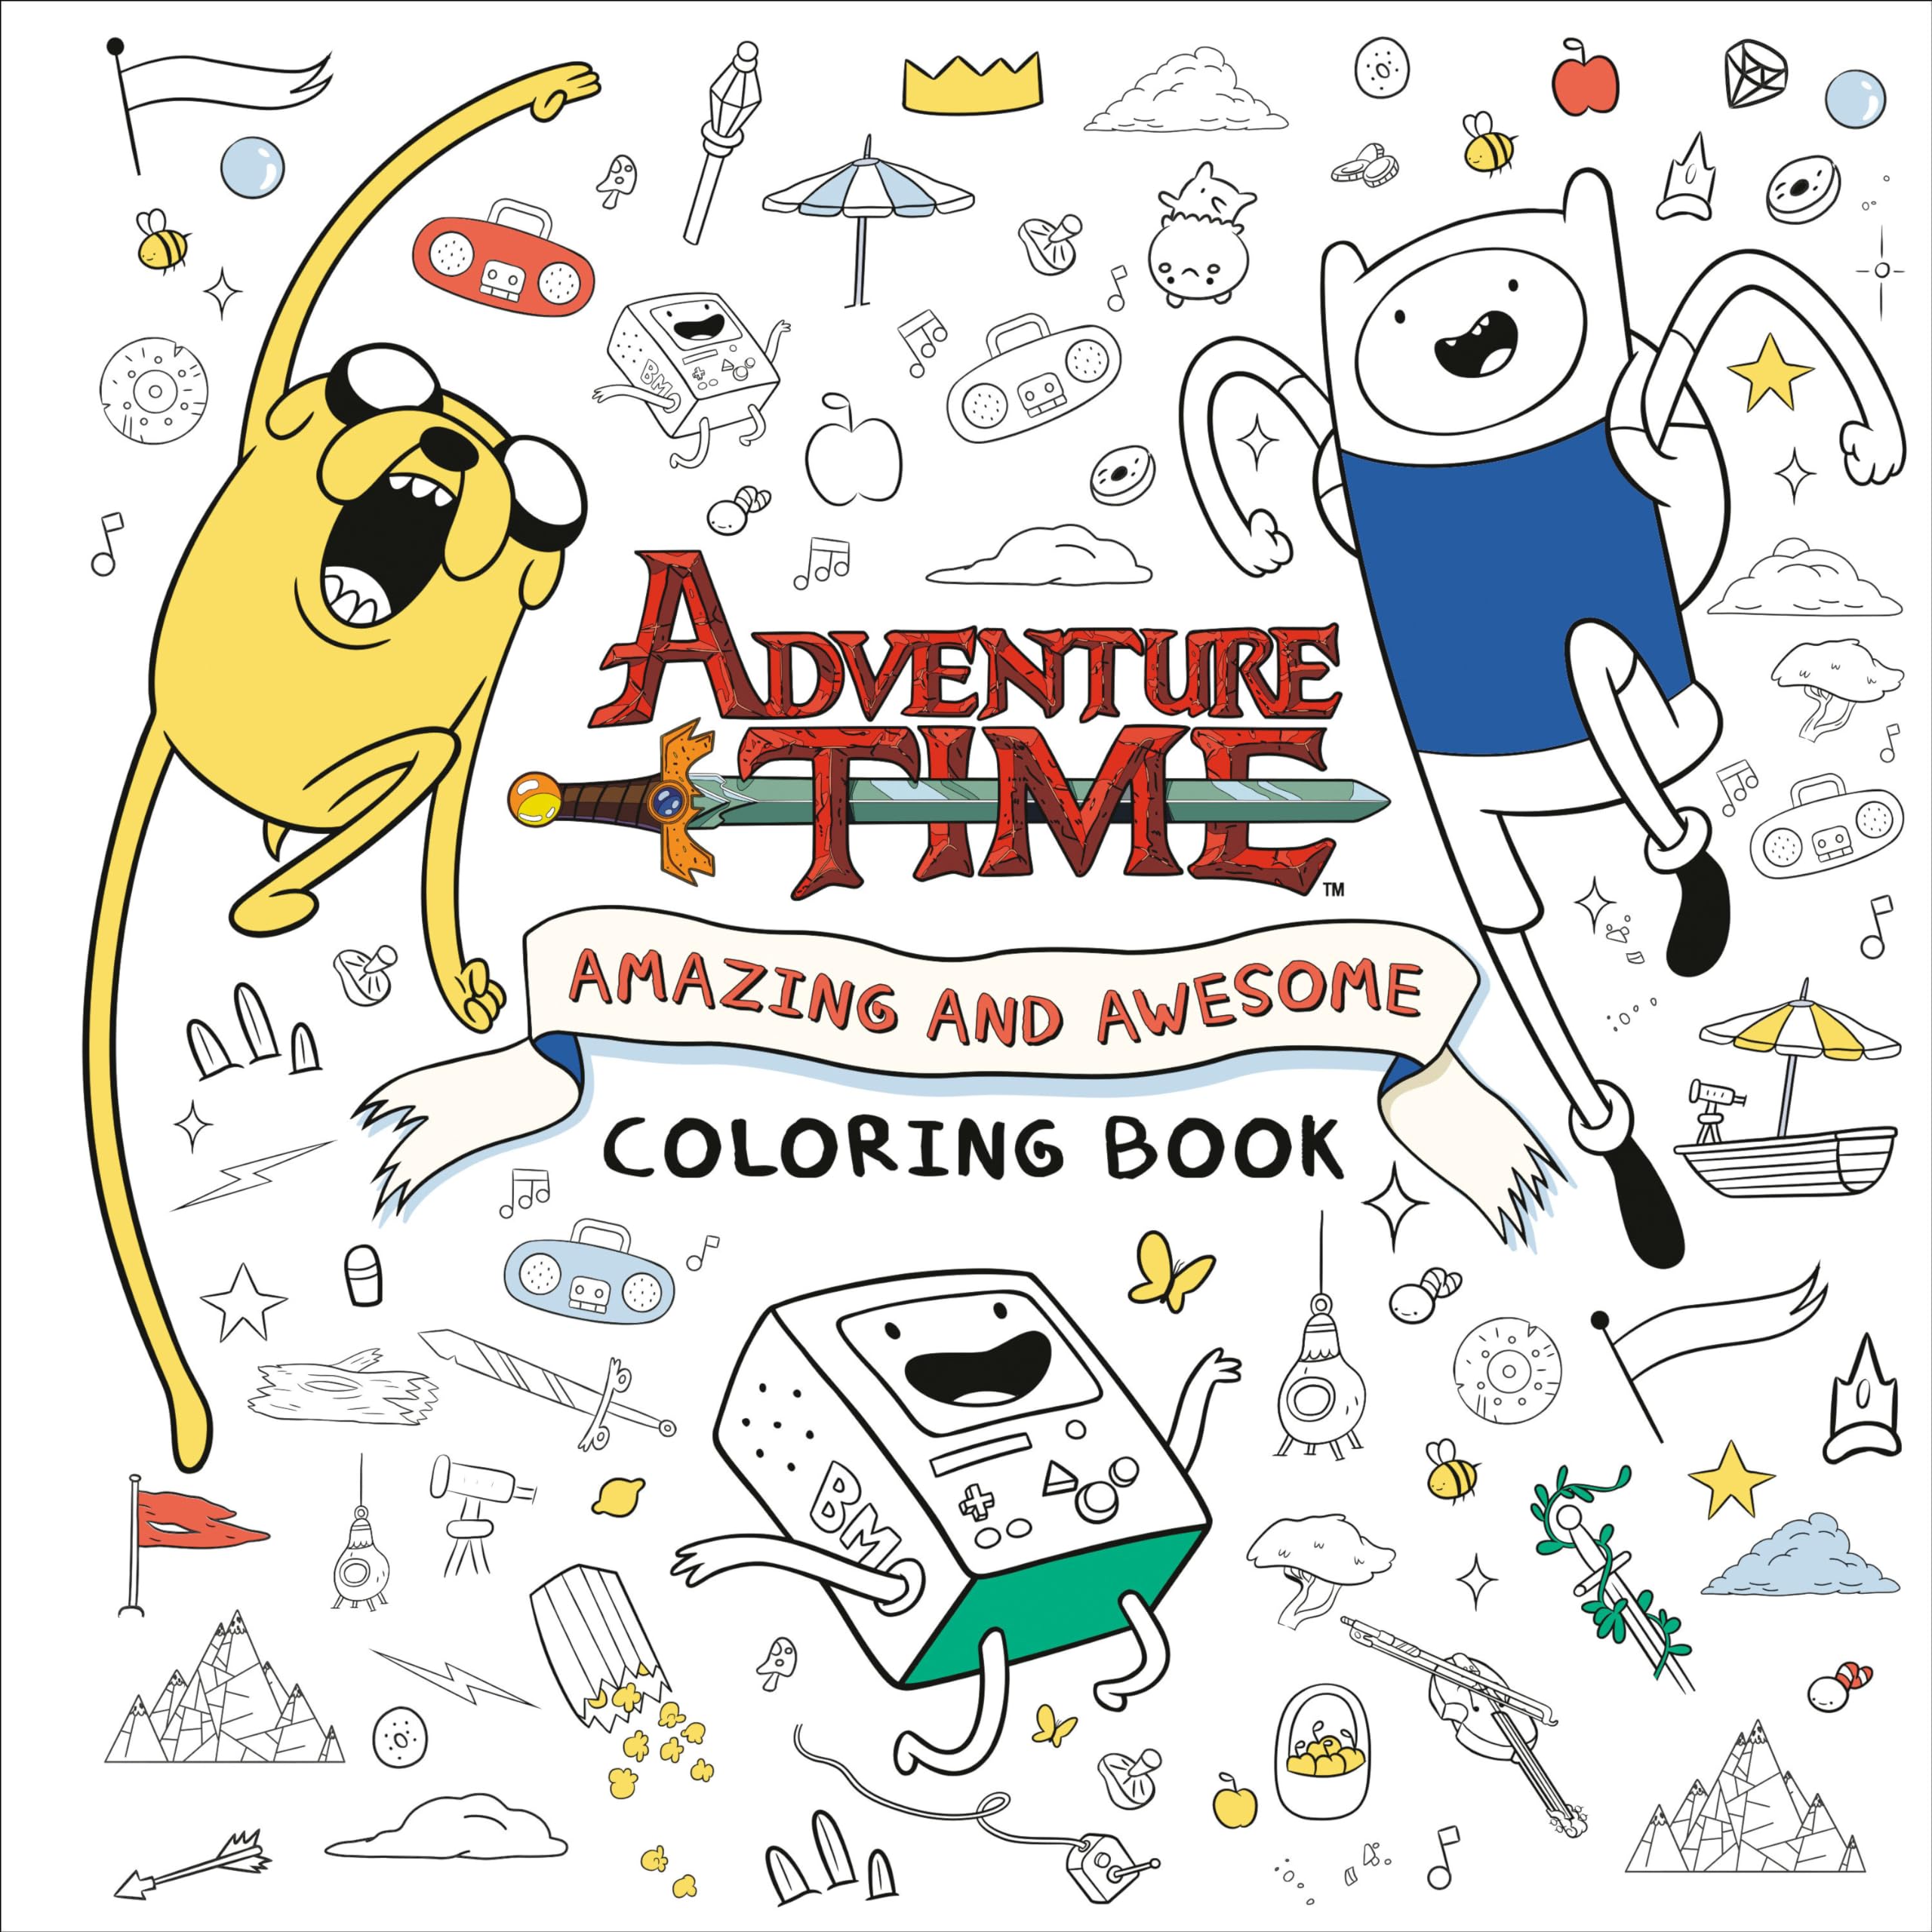 Adventure Time: Amazing and Awesome Coloring Book